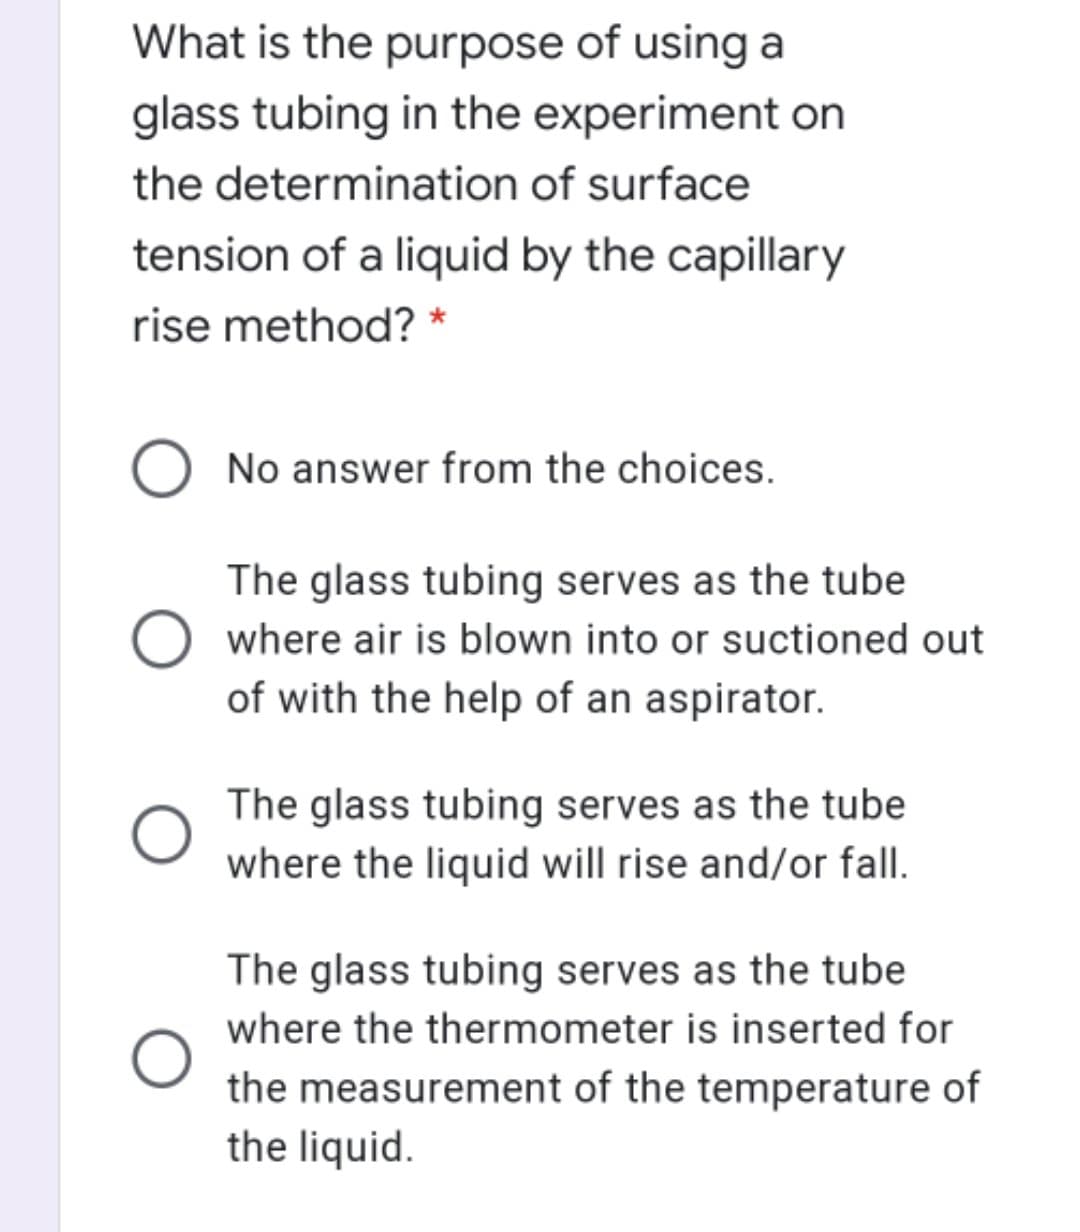 What is the purpose of using a
glass tubing in the experiment on
the determination of surface
tension of a liquid by the capillary
rise method? *
No answer from the choices.
The glass tubing serves as the tube
where air is blown into or suctioned out
of with the help of an aspirator.
The glass tubing serves as the tube
where the liquid will rise and/or fall.
The glass tubing serves as the tube
where the thermometer is inserted for
the measurement of the temperature of
the liquid.
